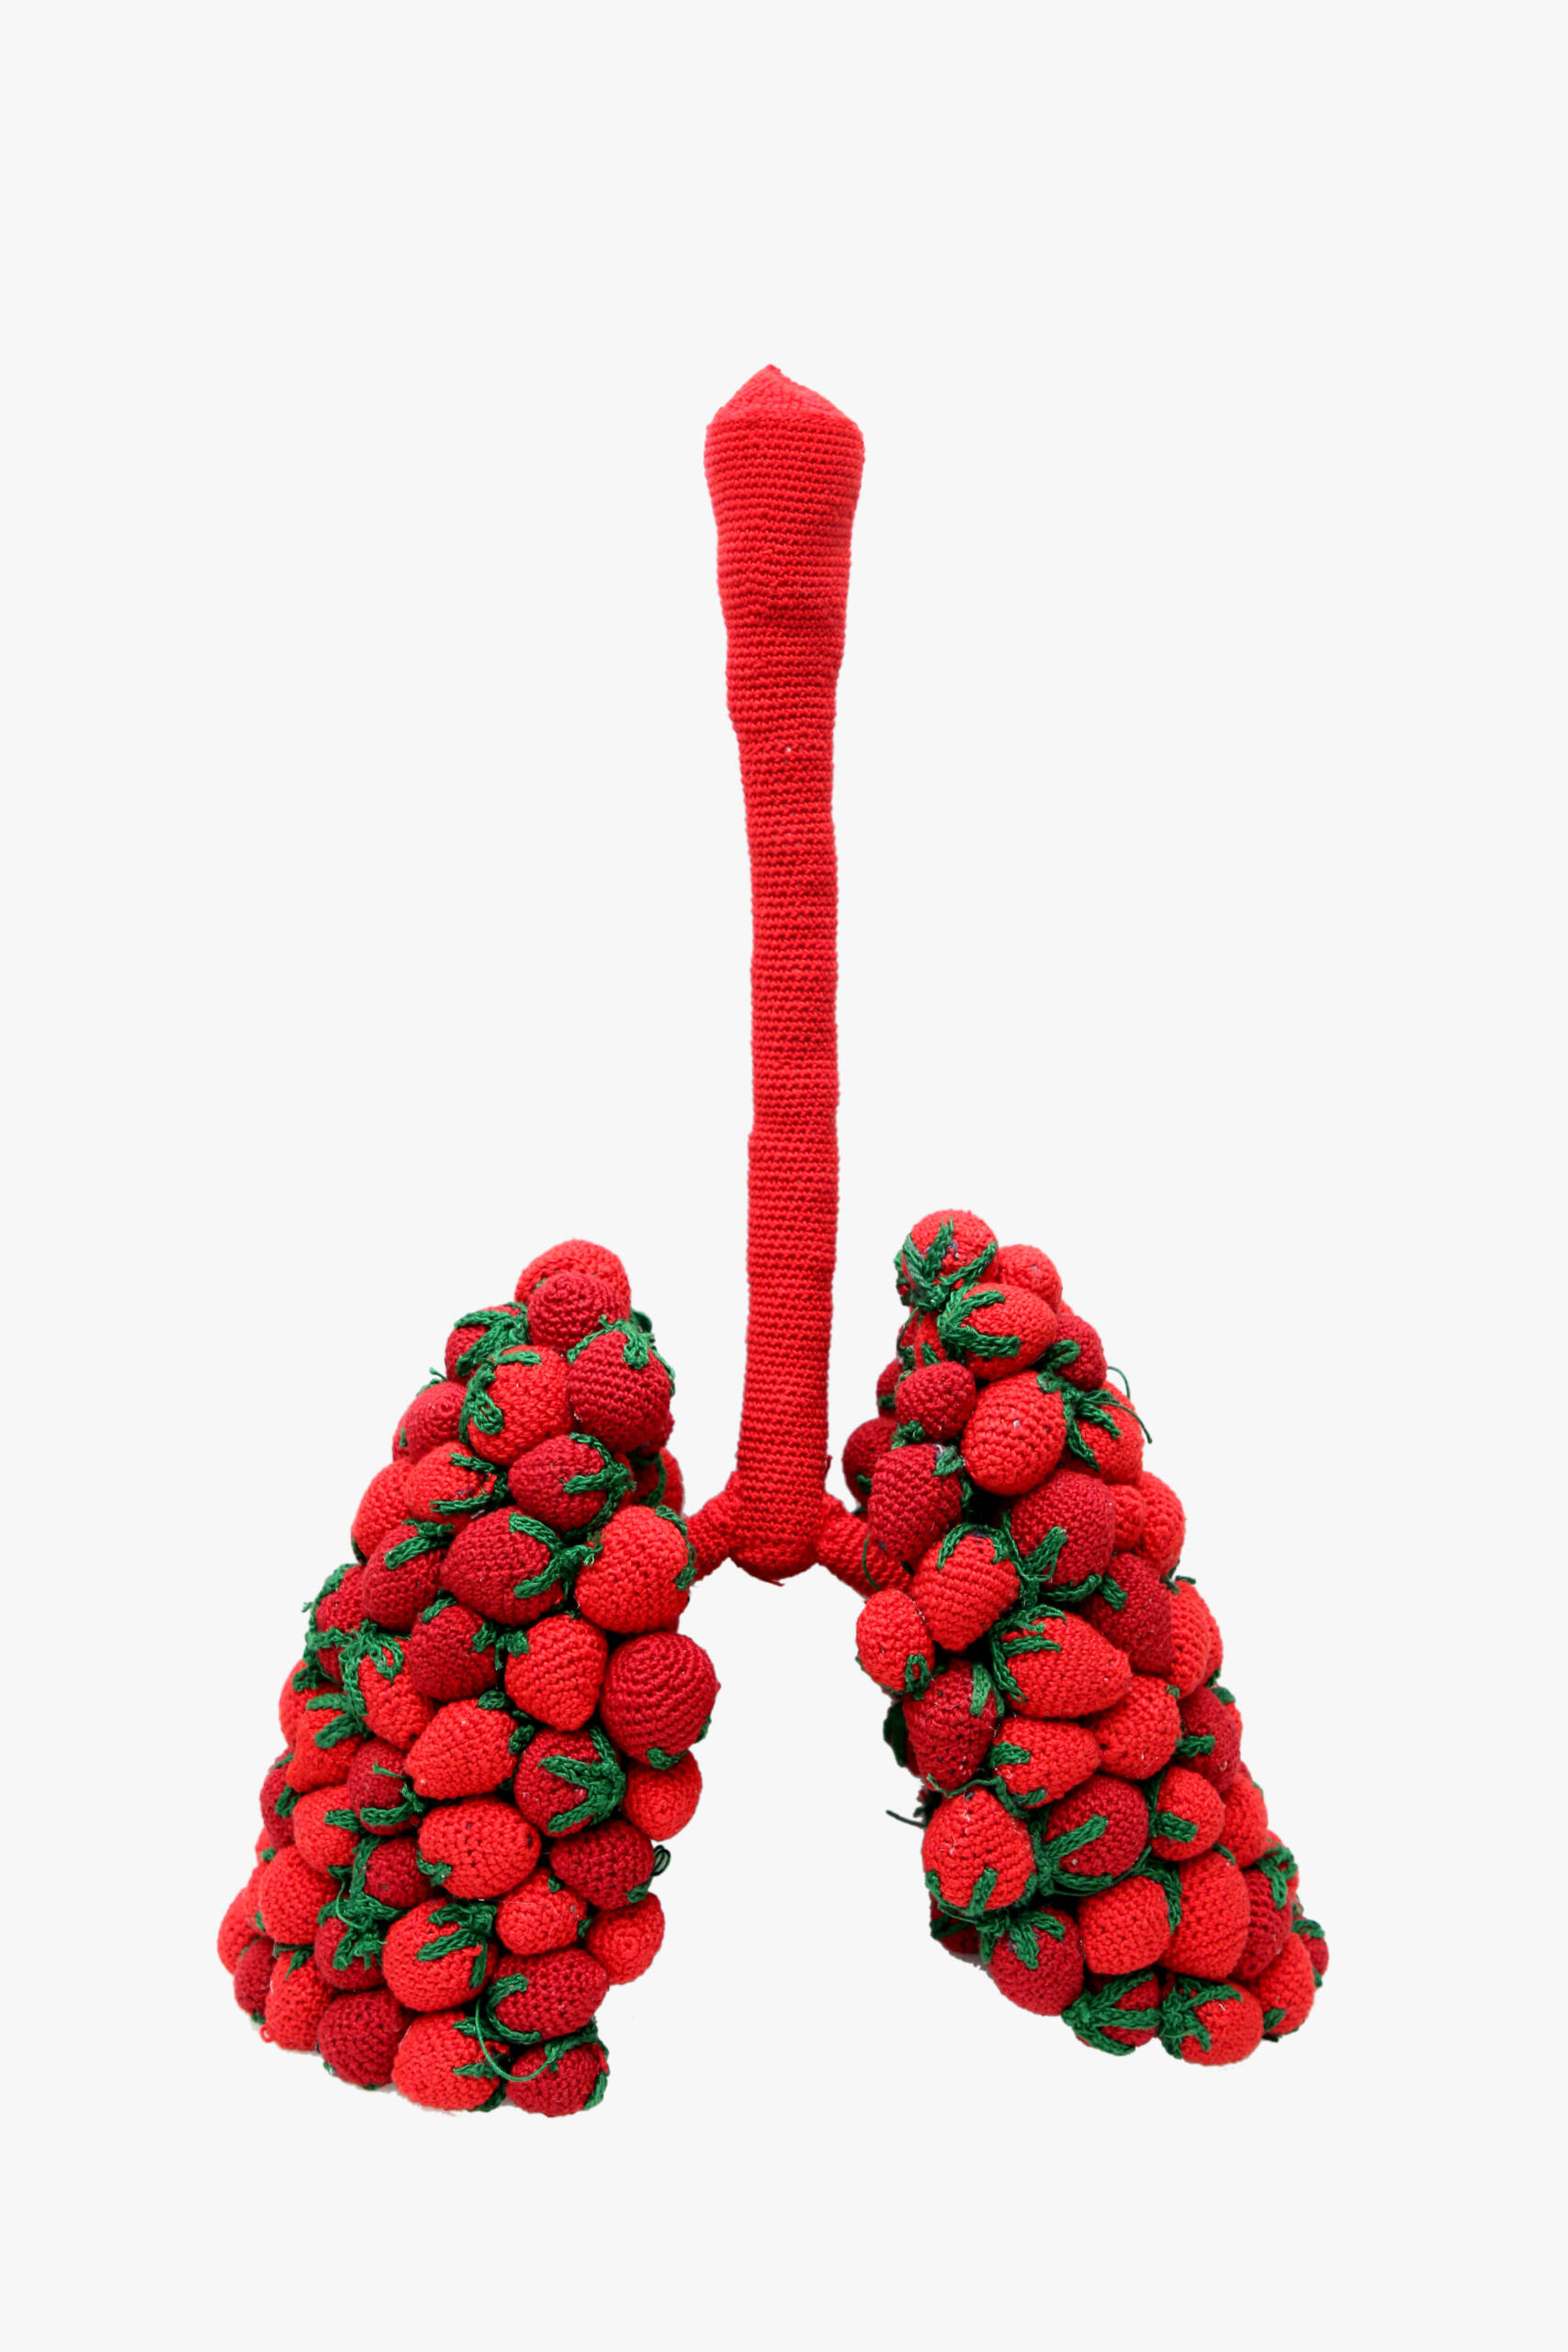 A lung of fruit